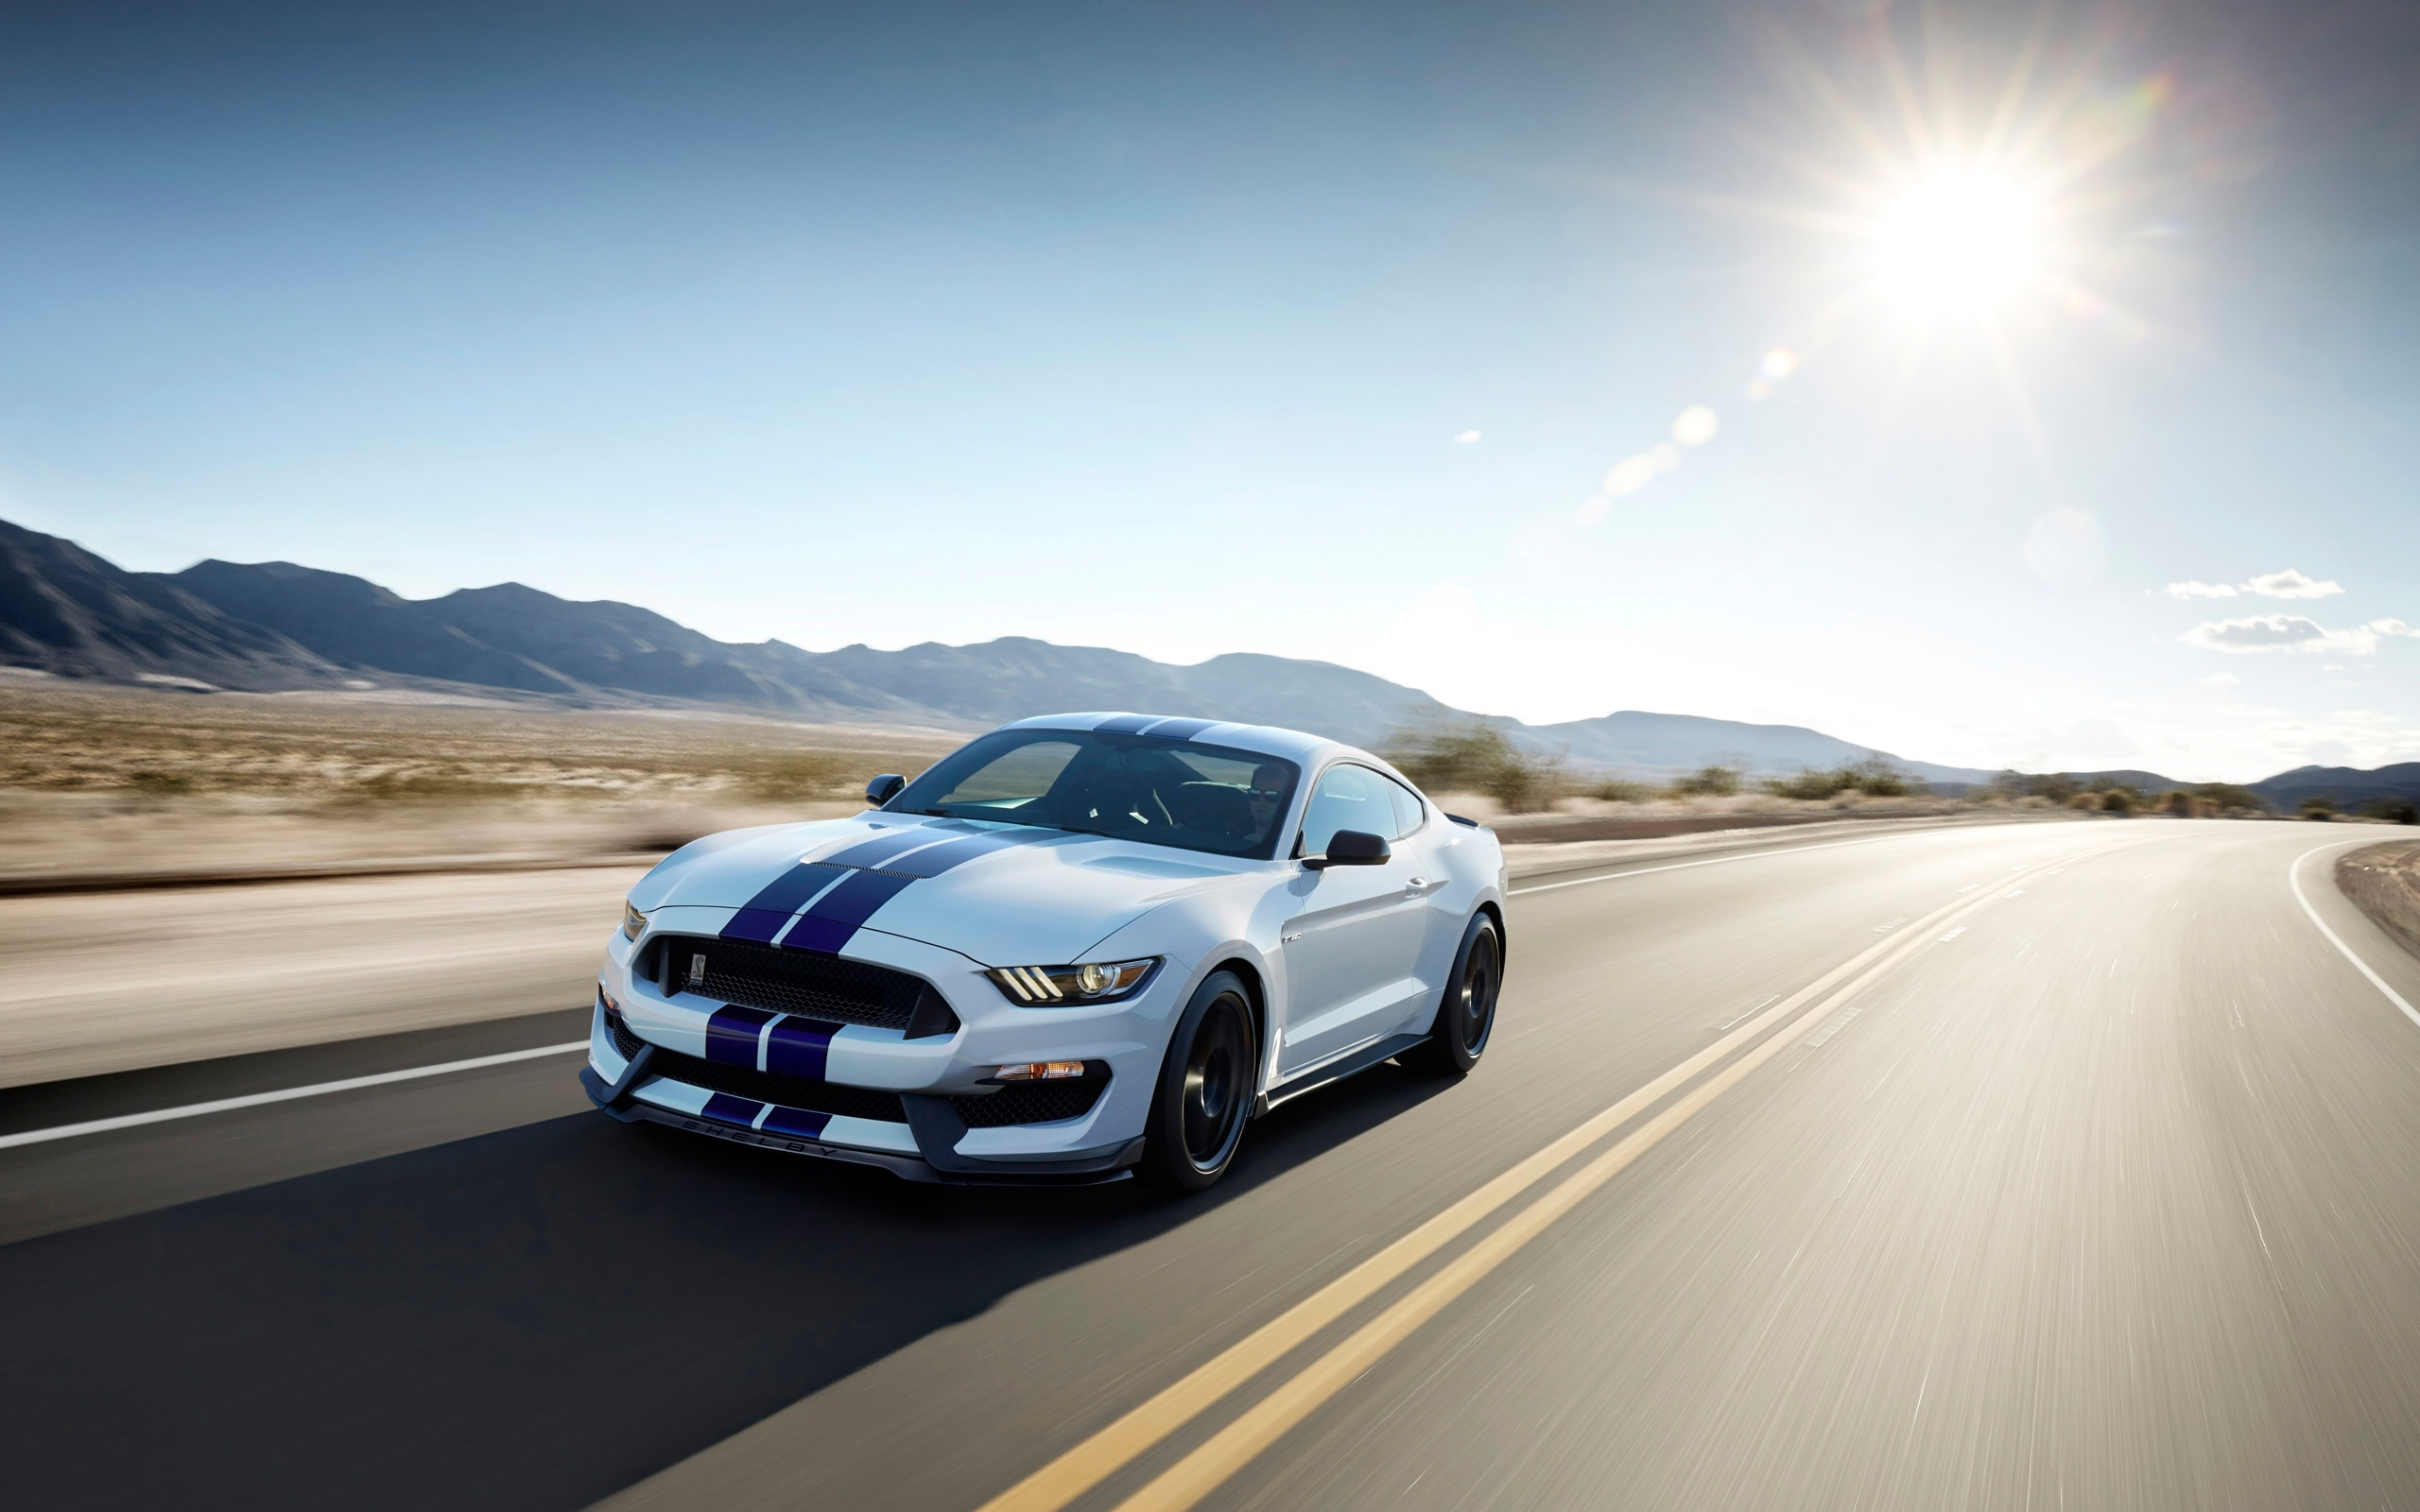 Shelby Ford Mustang Gt350 Wallpaper